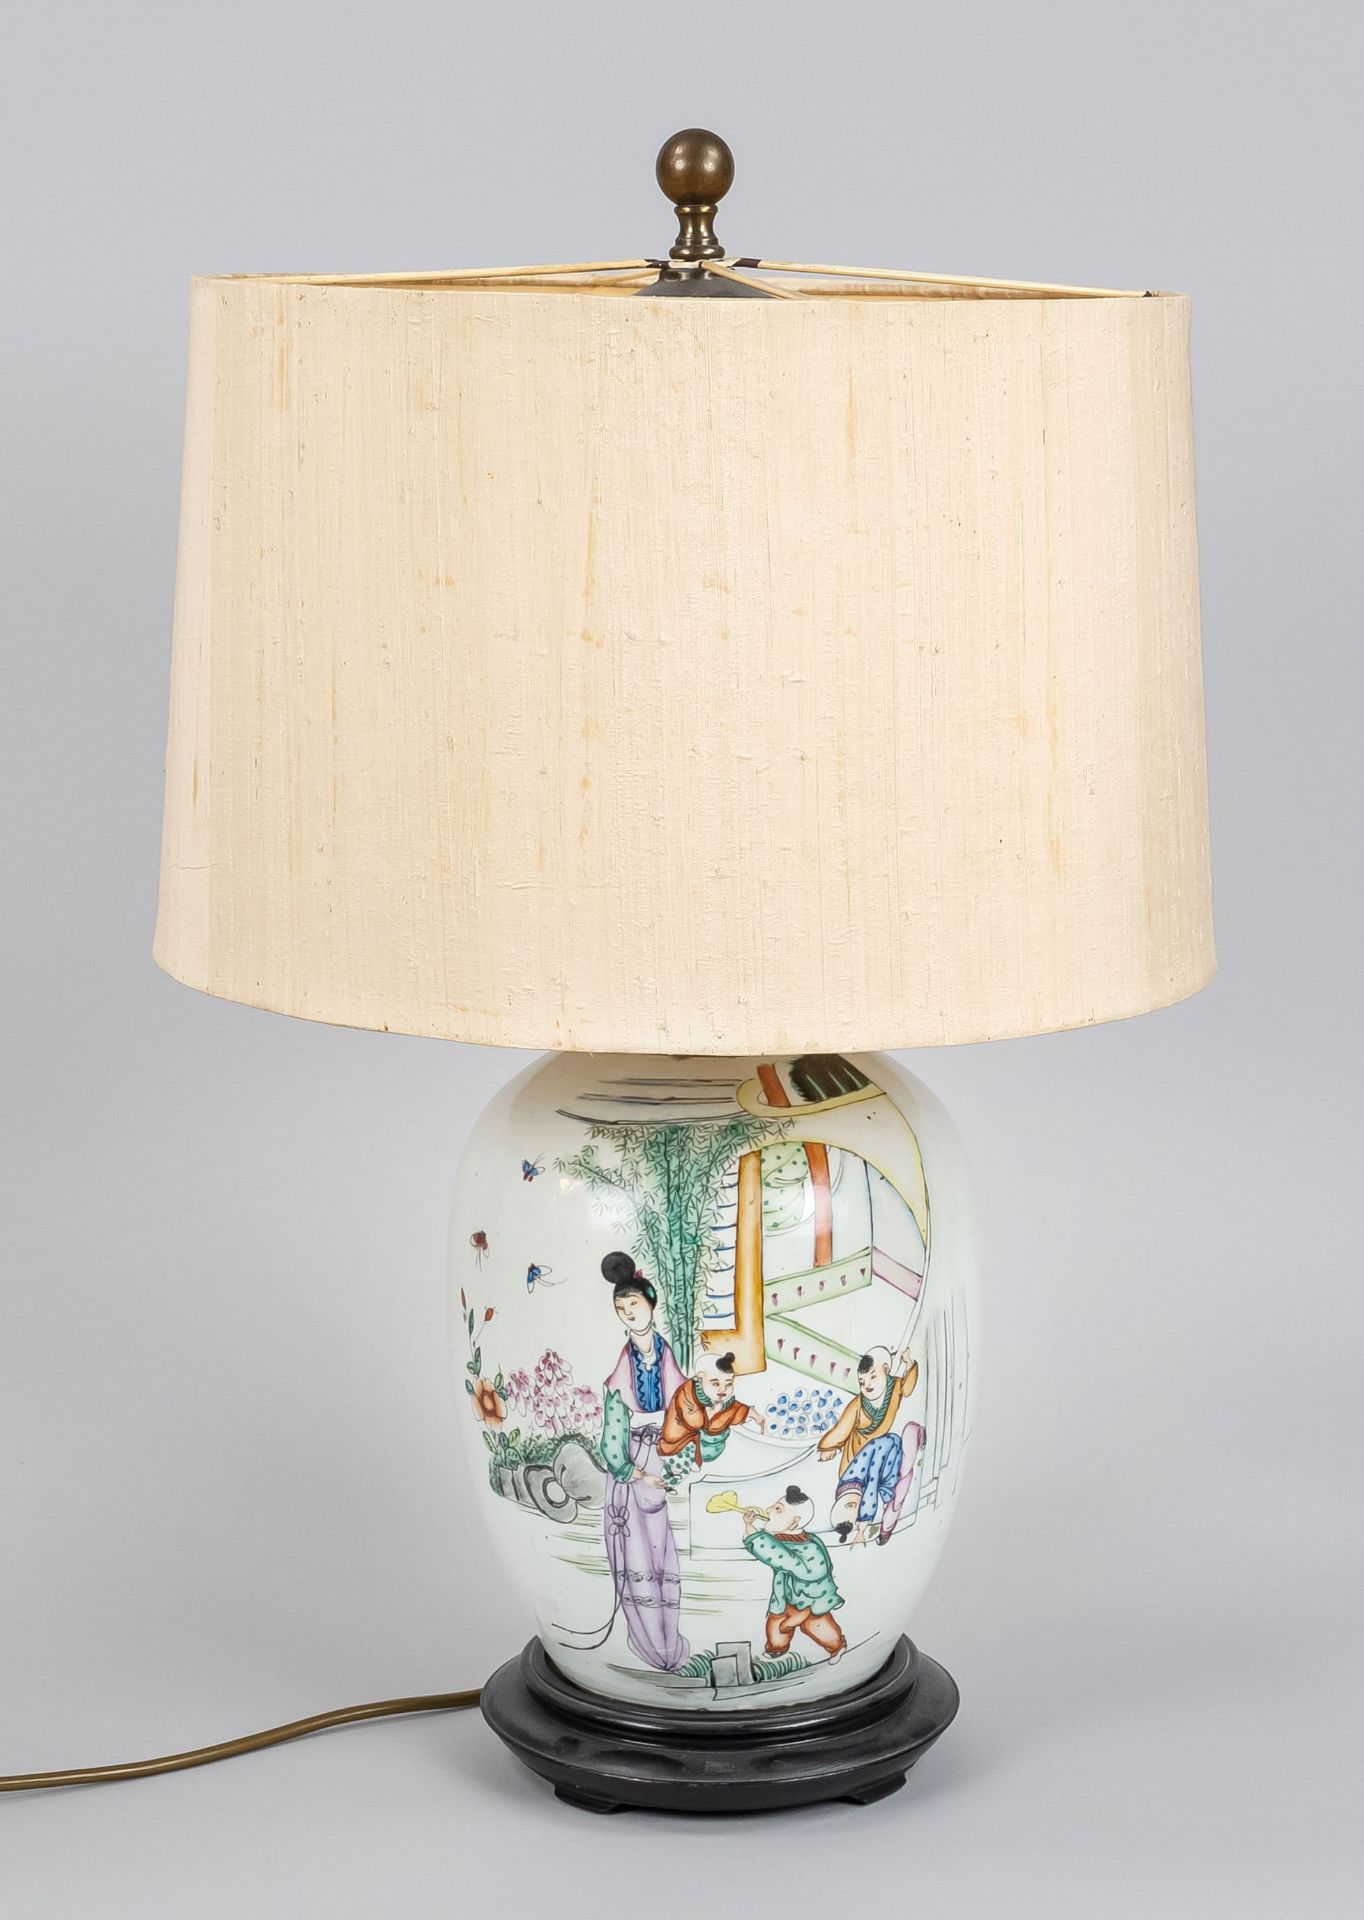 Vase lamp ''Palace ladies with children''. China, 20th c., porcelain with polychrome glaze